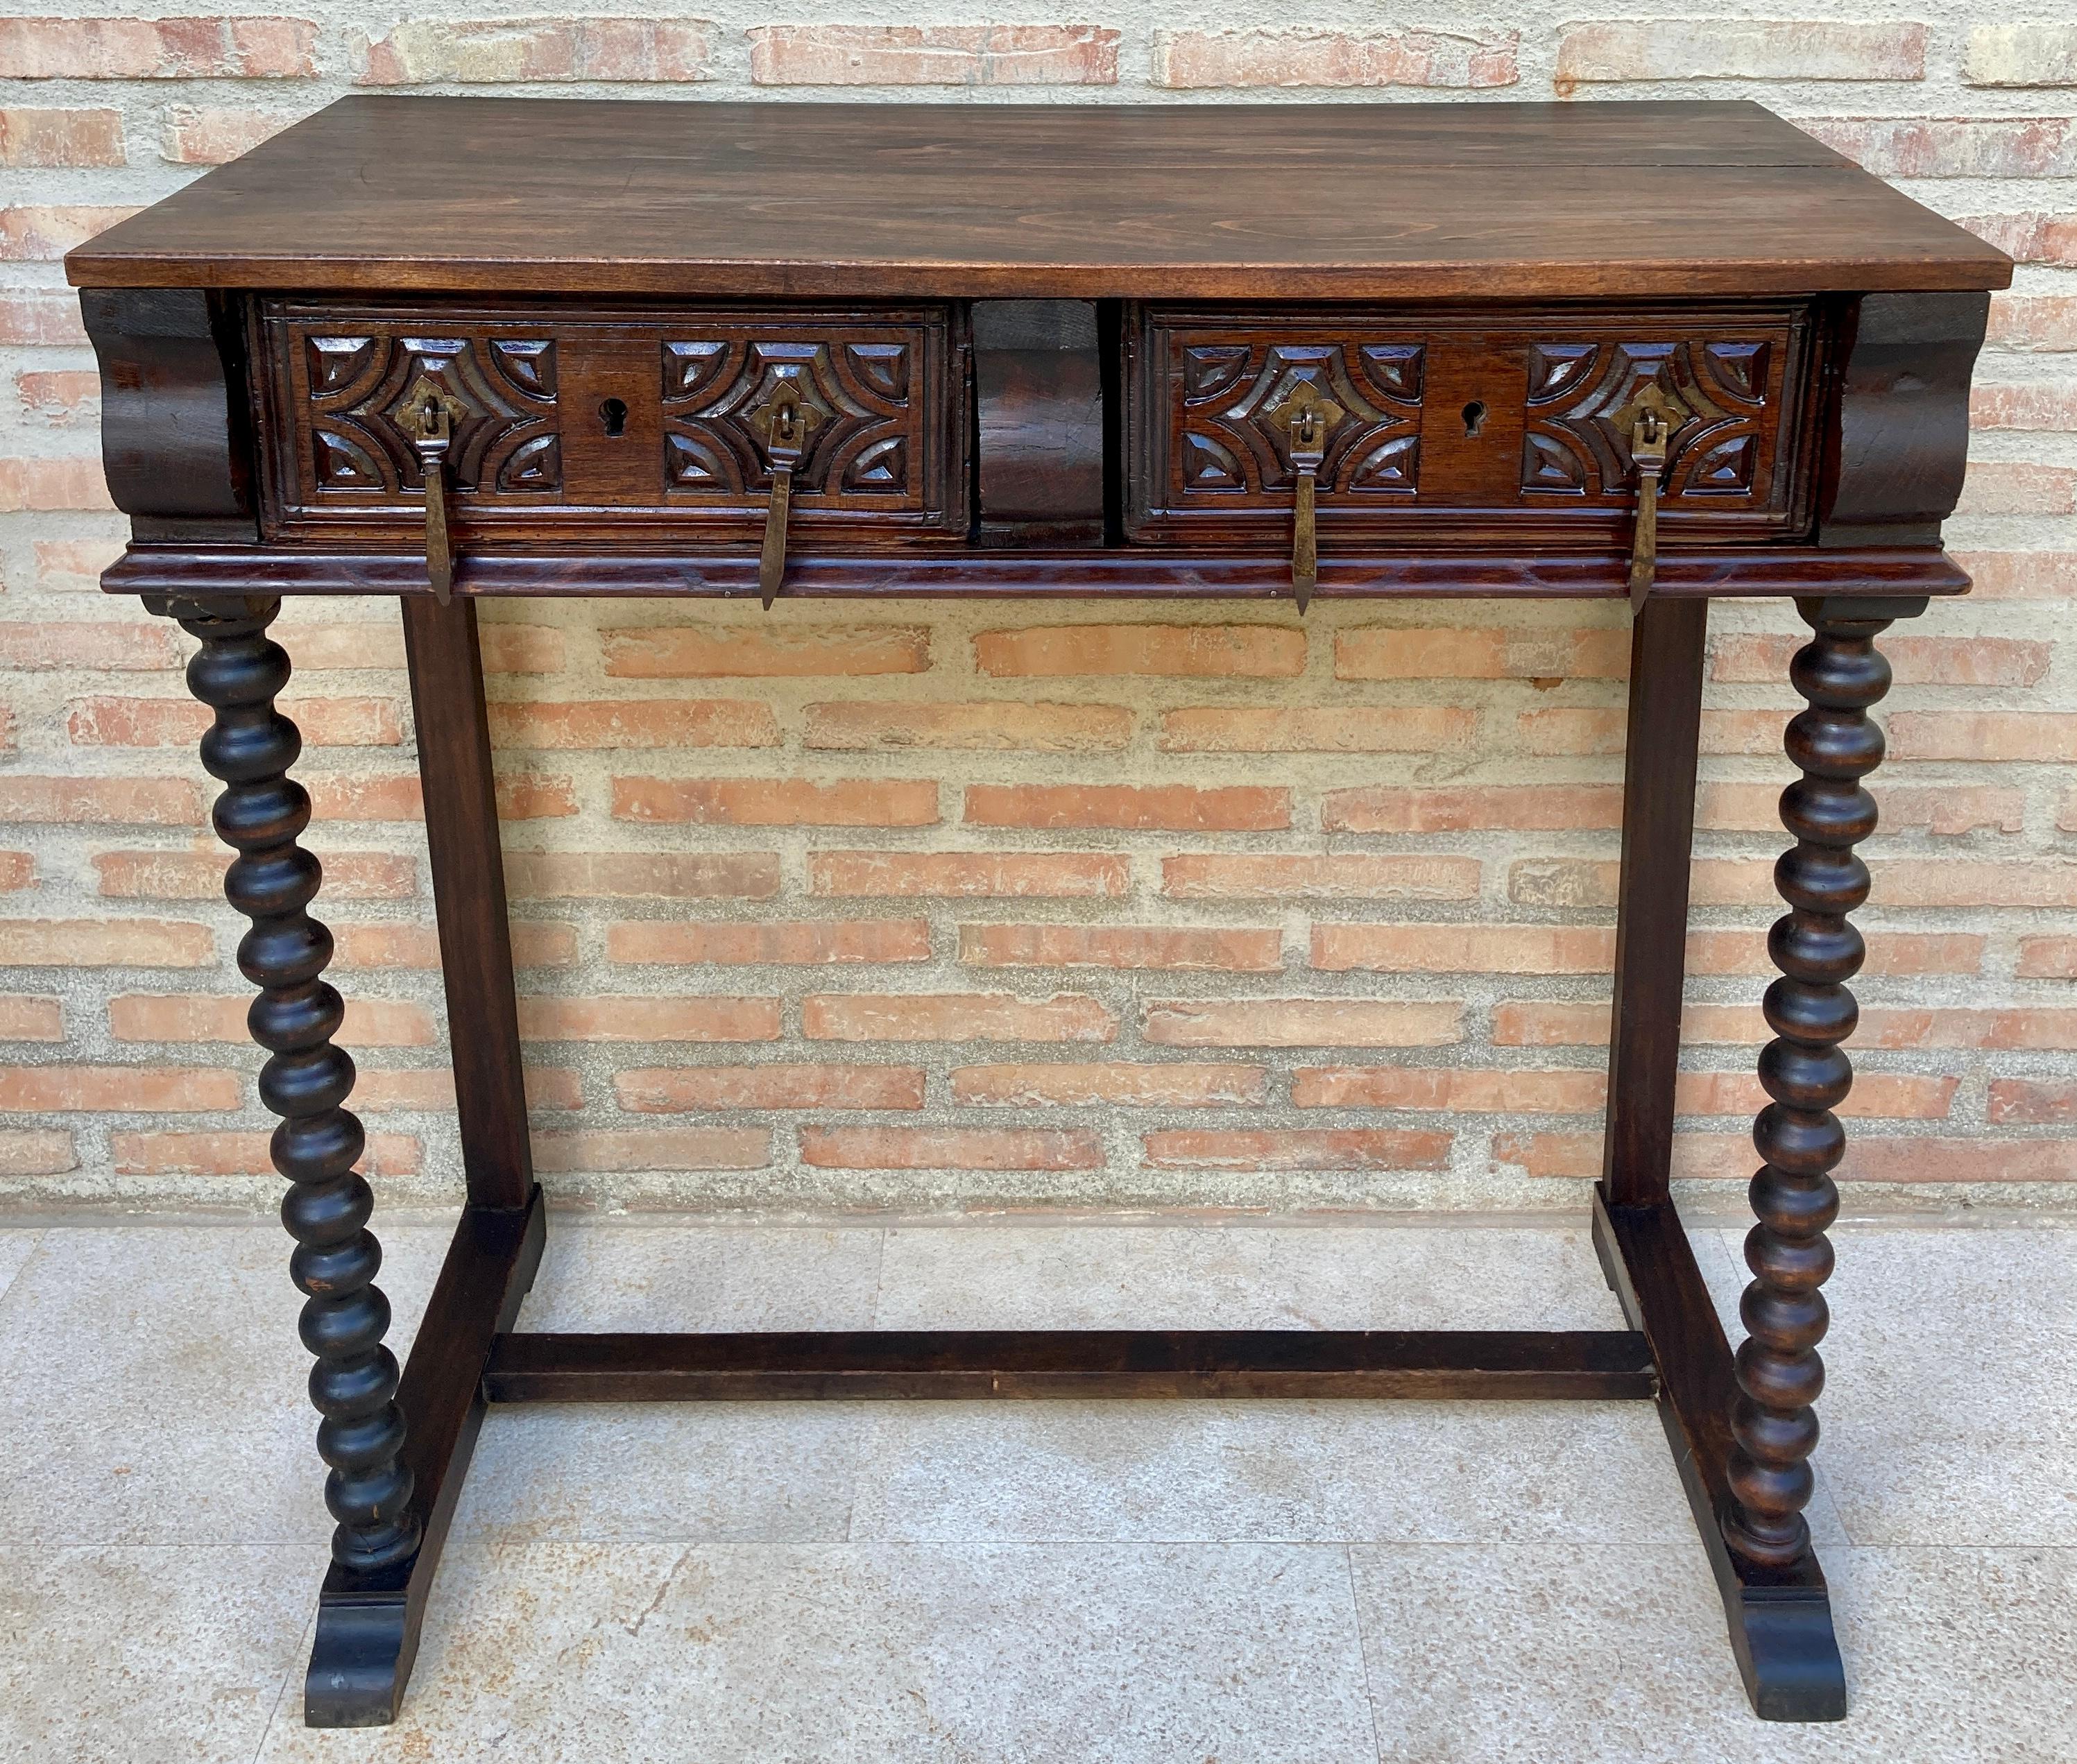 Spanish console table from the 19th century. The rectangular top has two carved drawers, the end legs are beautifully carved.
It can be used as a desk, side table, dresser or console.
Beautiful carved Solomonic legs.